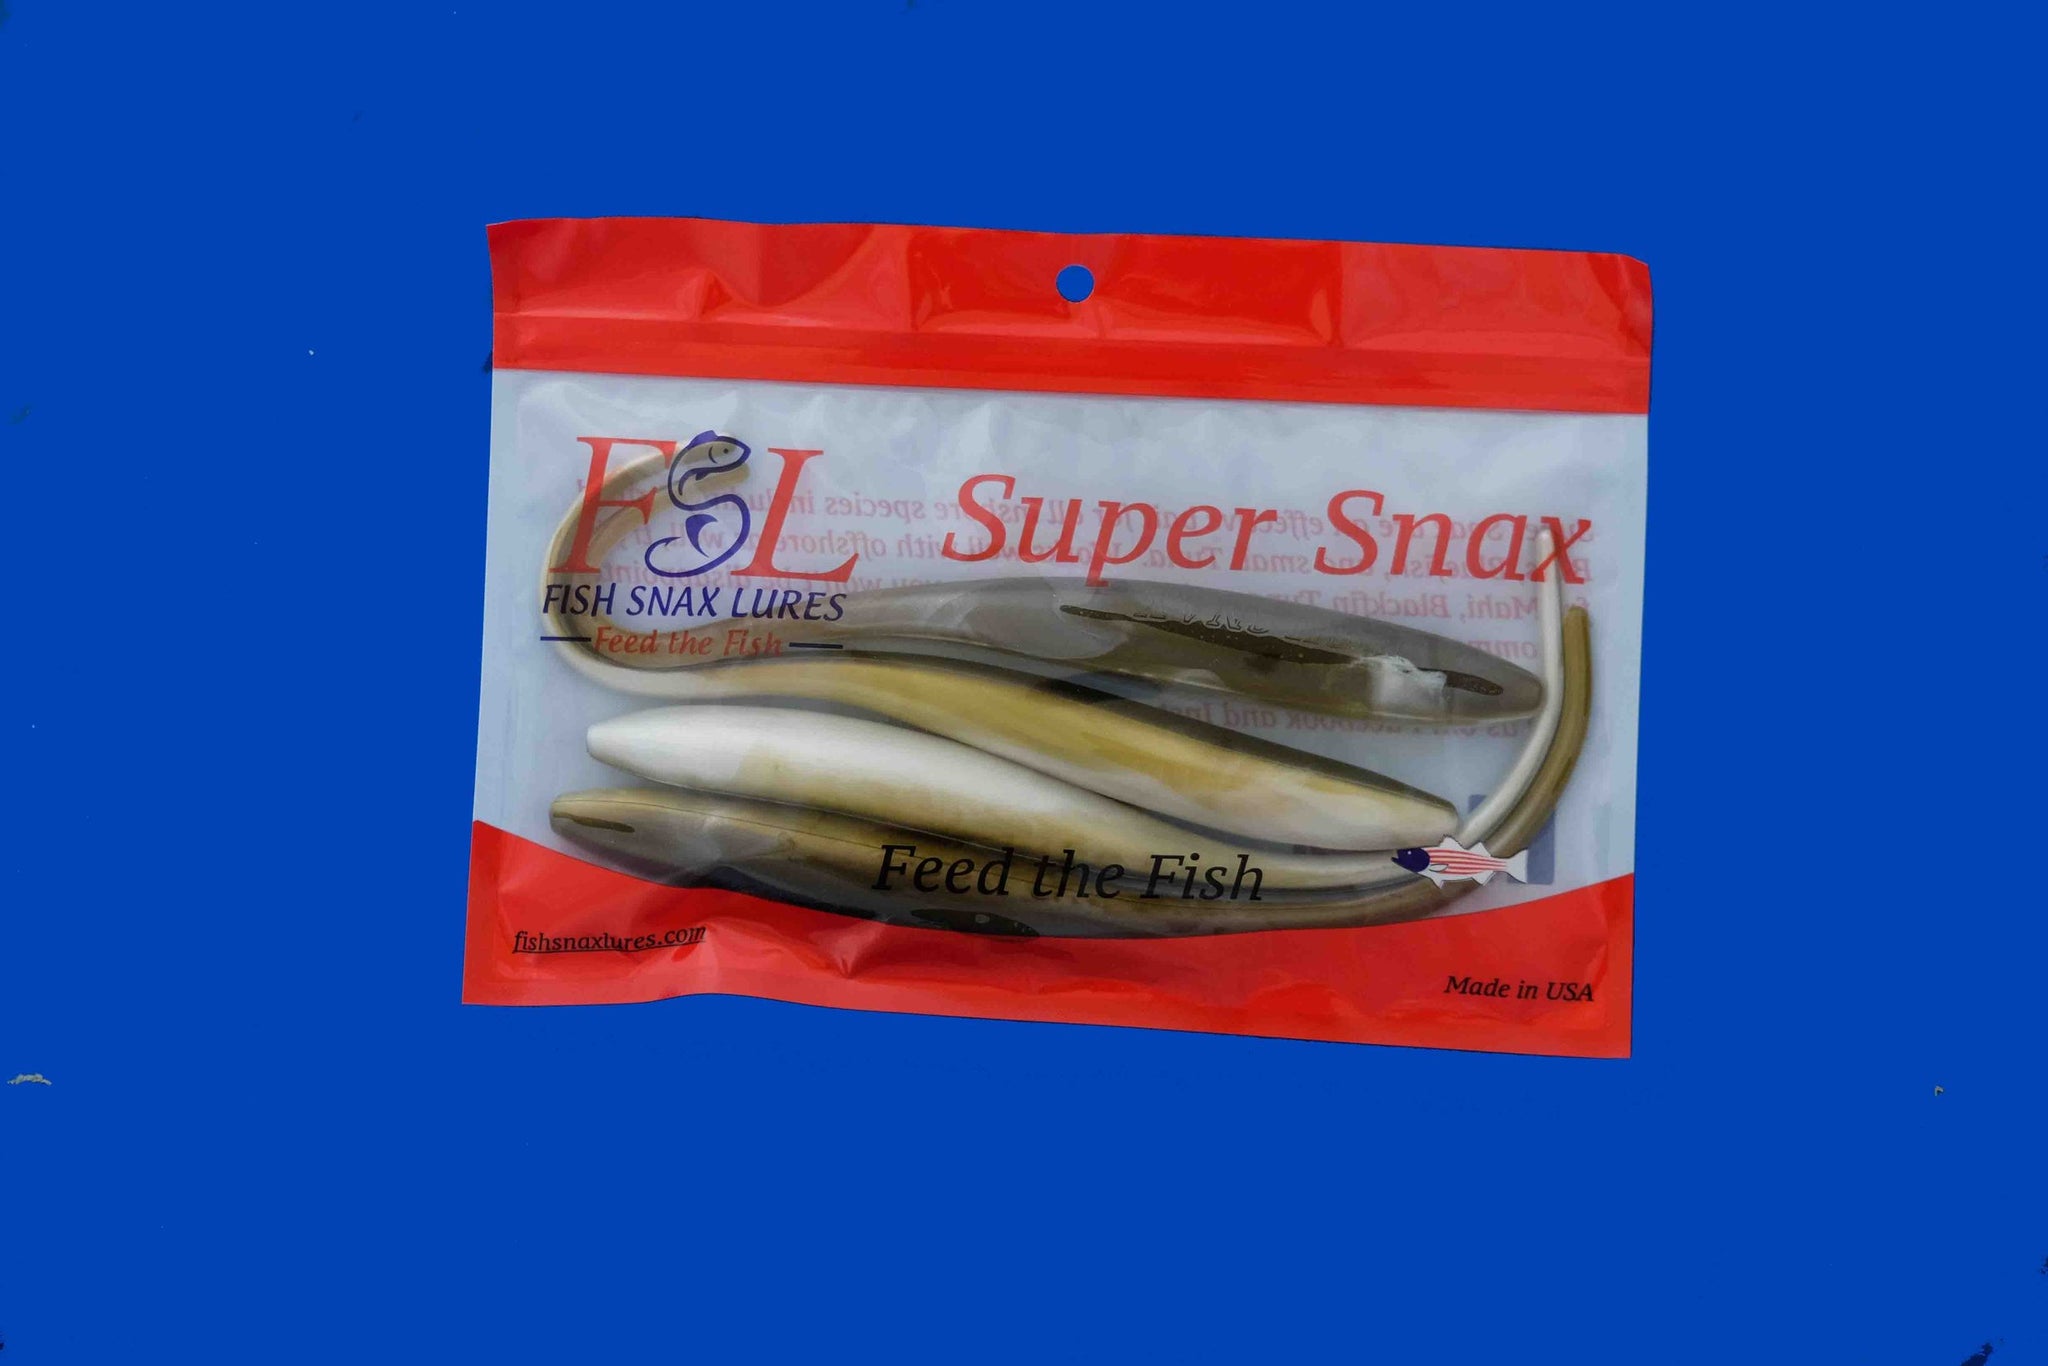 Fish Snax Lures - Super Snax – Surfland Bait and Tackle